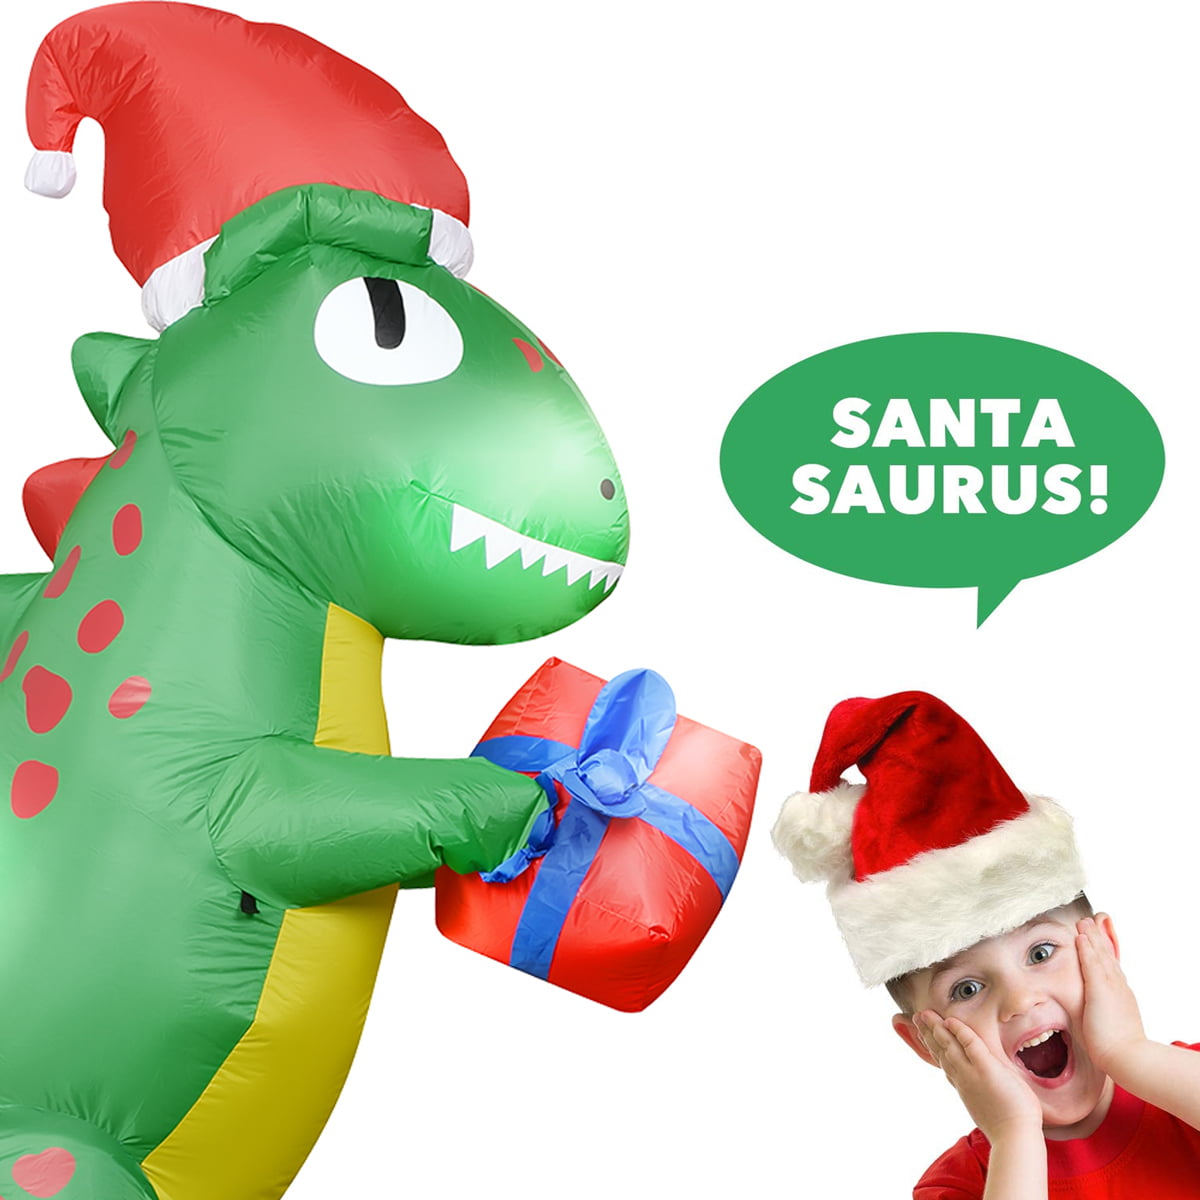 Giant Lawn Inflatable Home Garden Party Favor AJY 6 Feet Halloween Inflatable Dragon Dinosaur Tyrannosaurus LED Lights Decor Outdoor Indoor Holiday Decorations,Blow up Lighted Yard Decor 